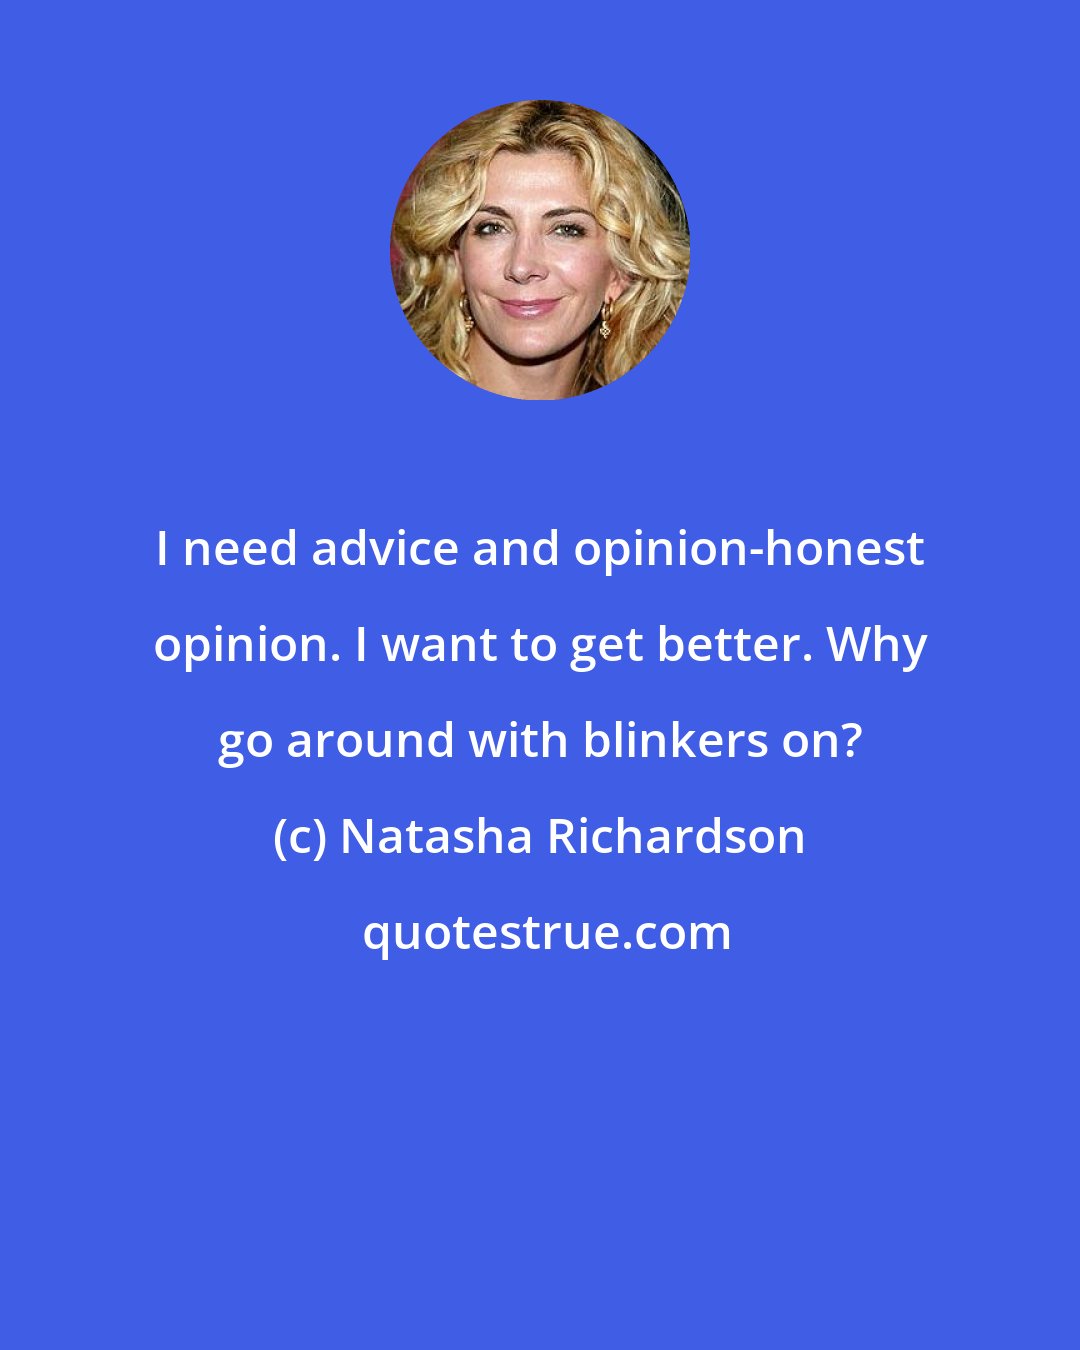 Natasha Richardson: I need advice and opinion-honest opinion. I want to get better. Why go around with blinkers on?